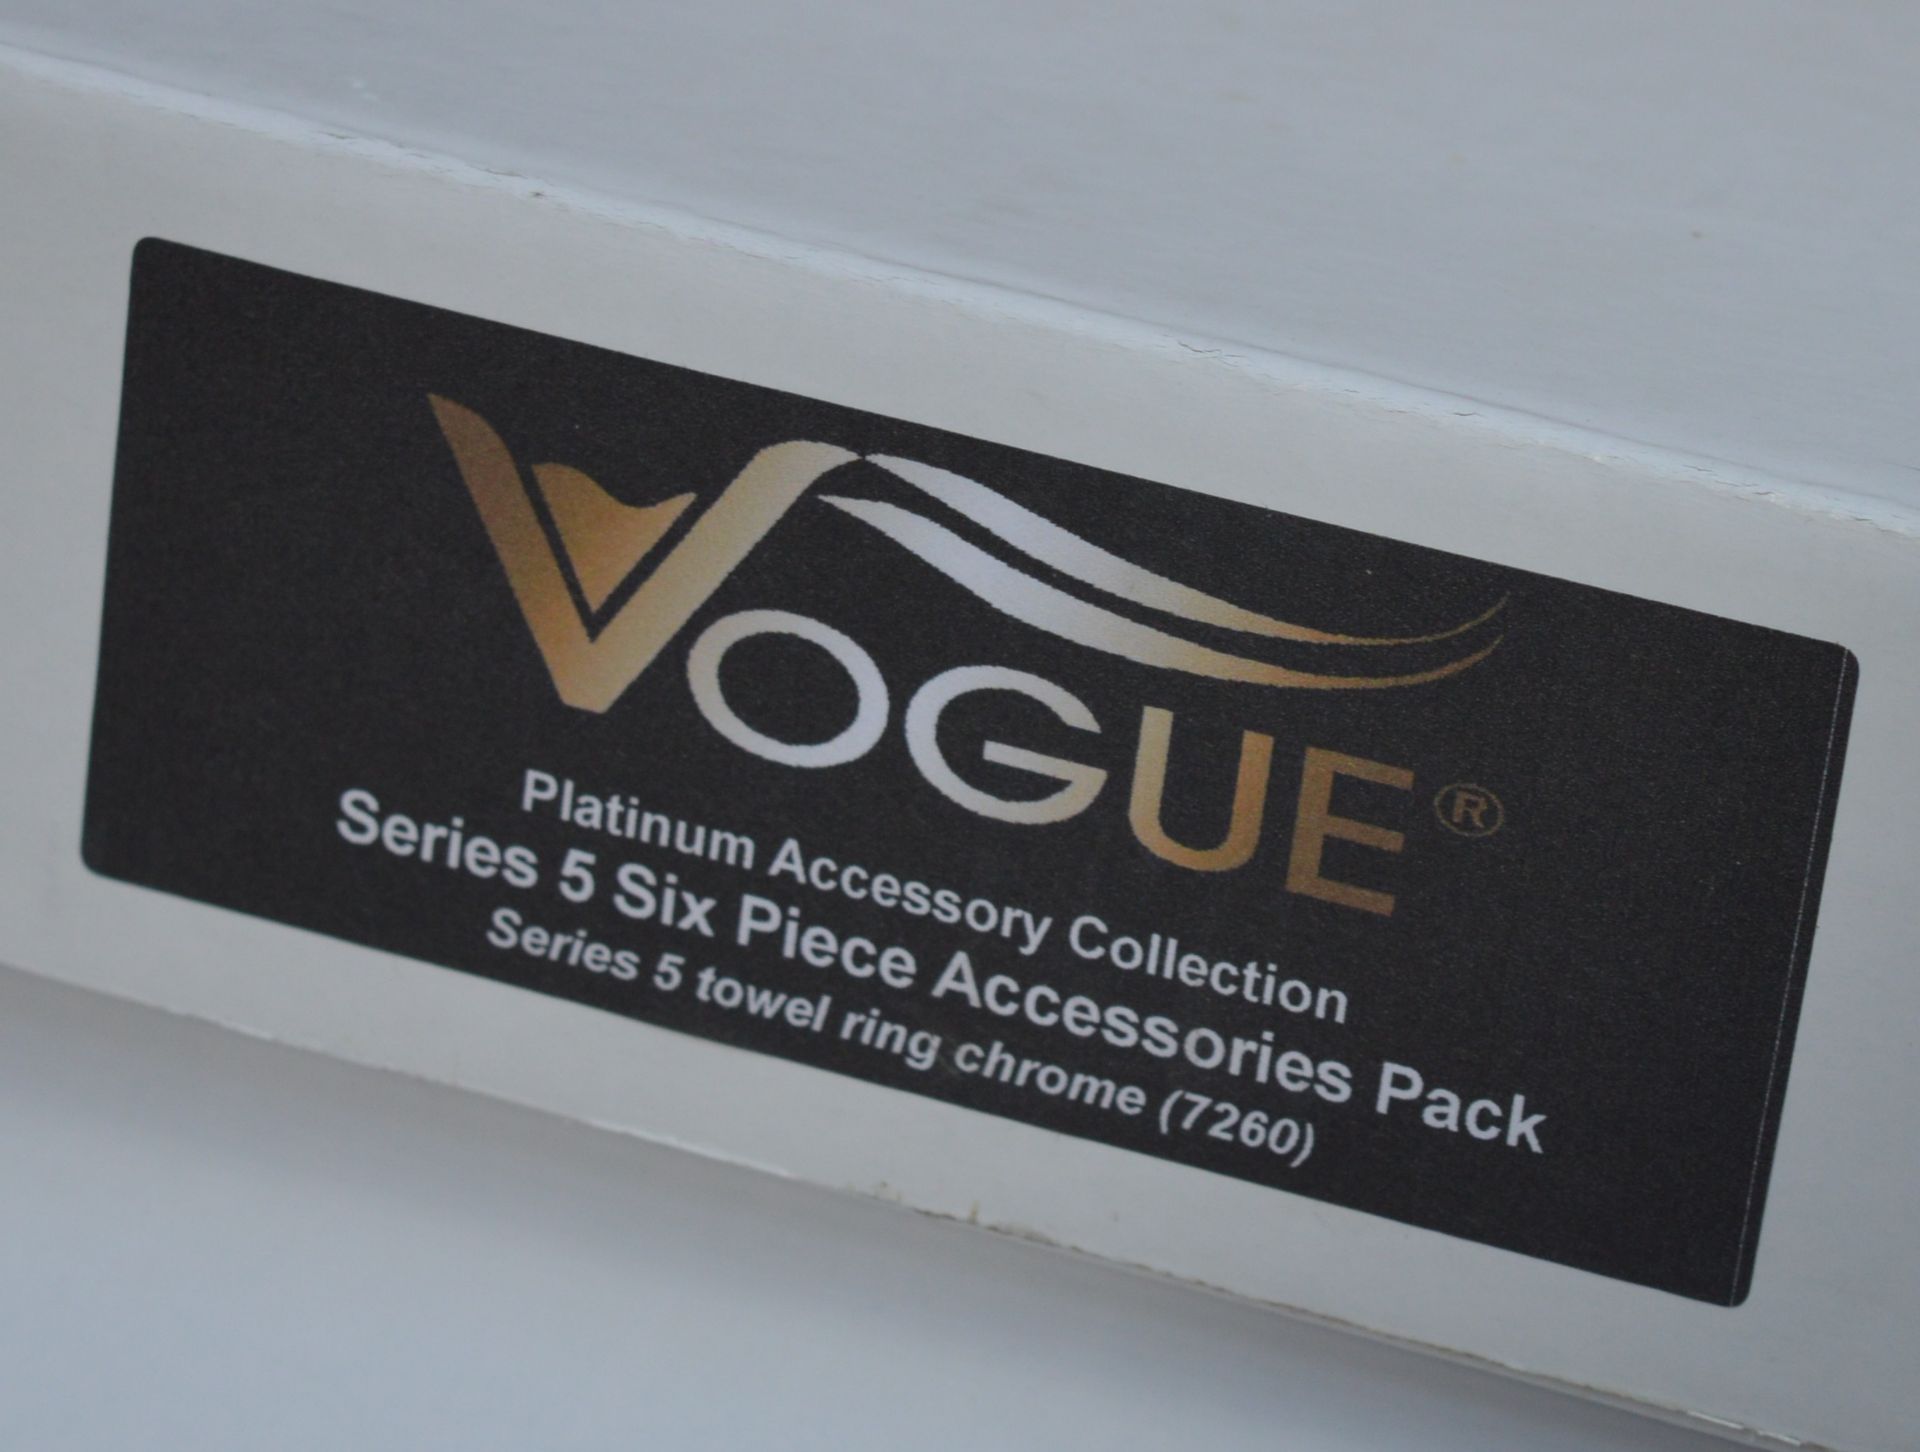 1 x Vogue Series 5 Six Piece Bathroom Accessory Set - Includes WC Roll Holder, Soap Dispenser, - Image 2 of 7